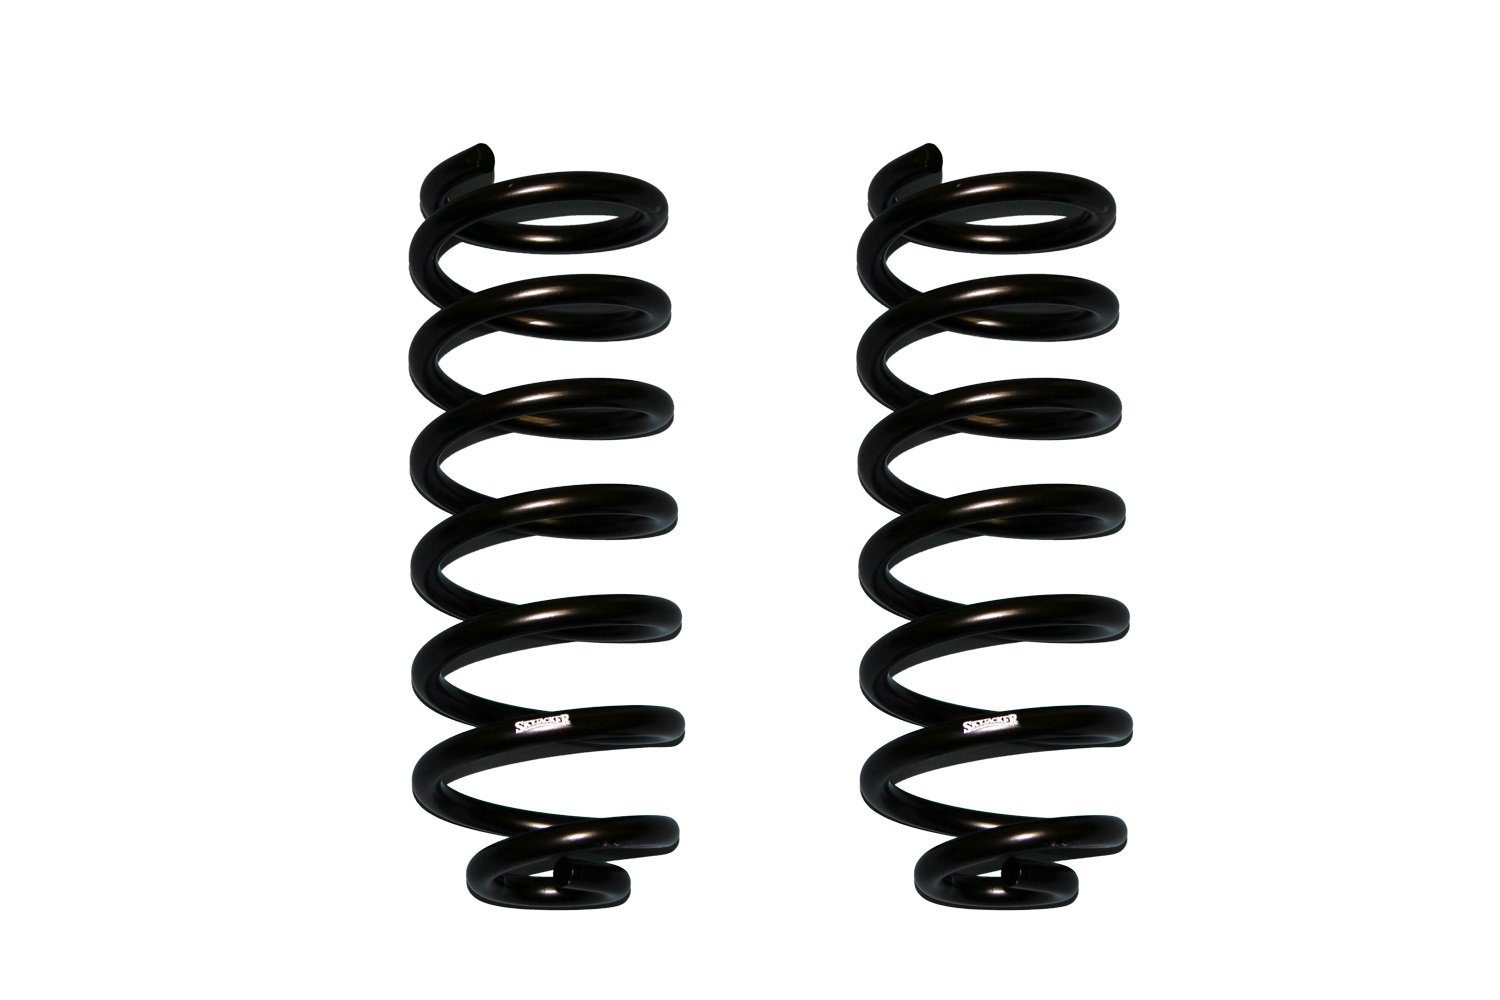 JK25RSR Softride Coil Springs, Lift: 2.5-3.5 in.